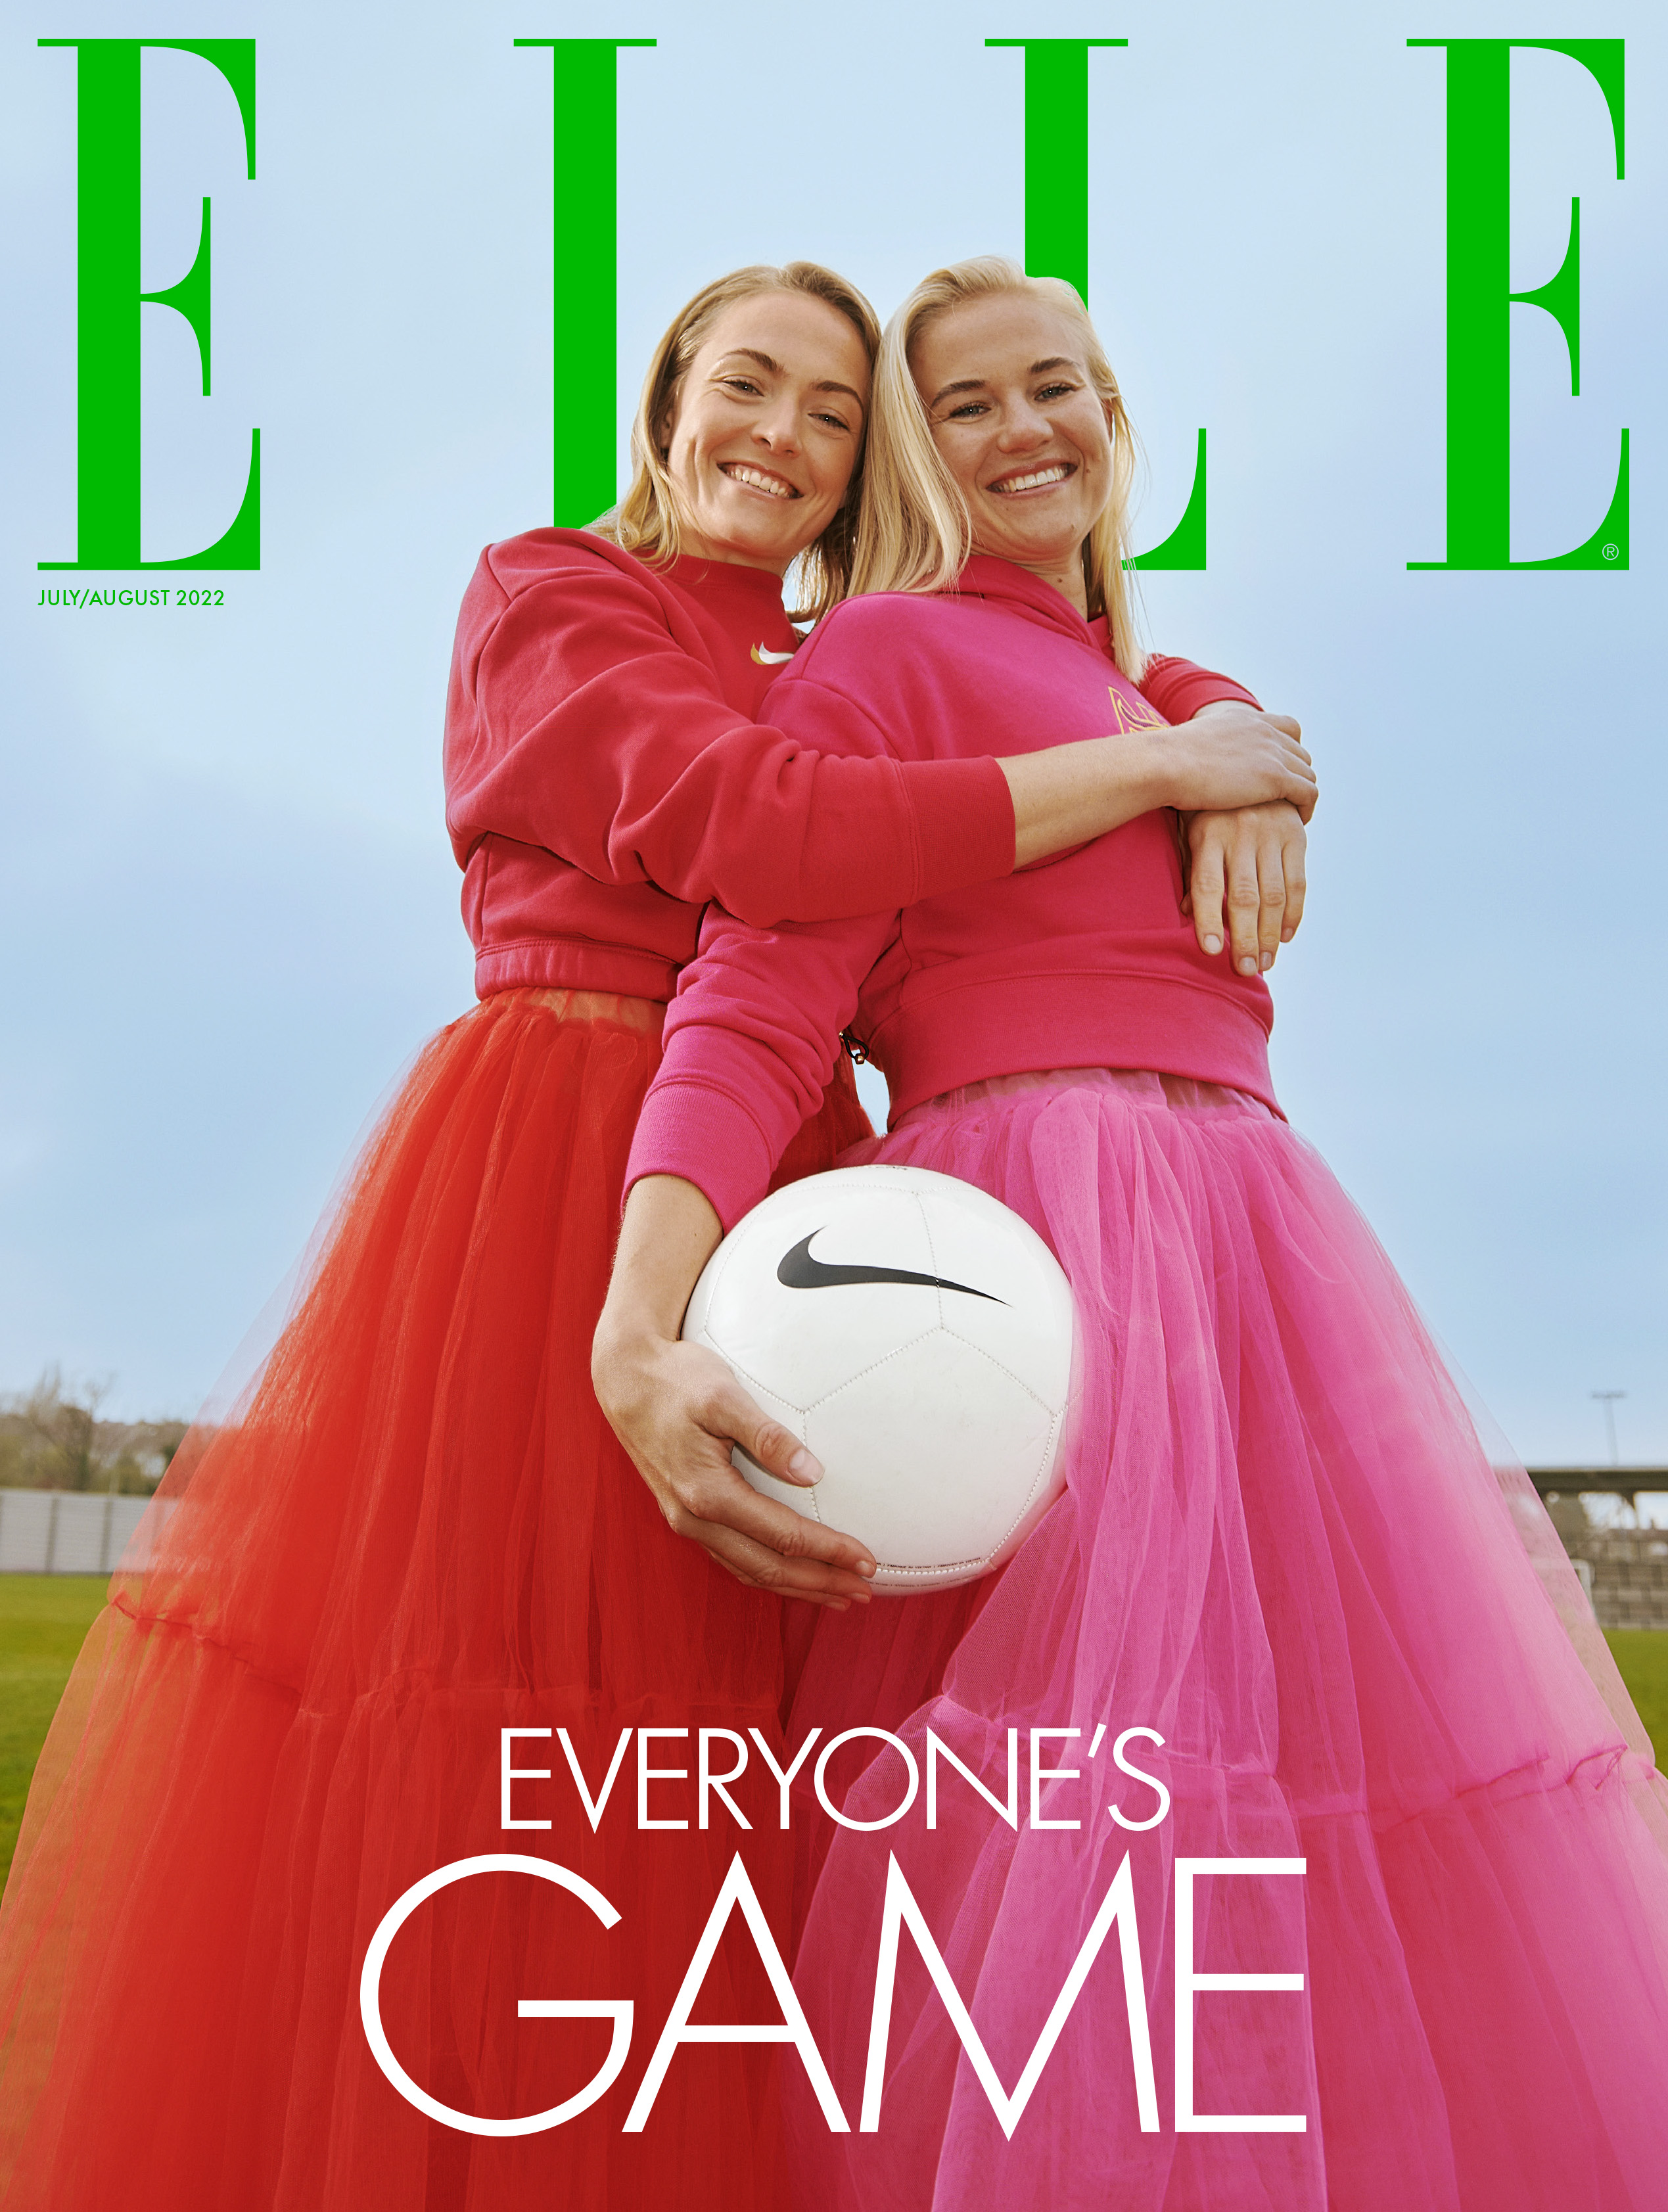 Elle and Nike launch Women's Euro campaign - The